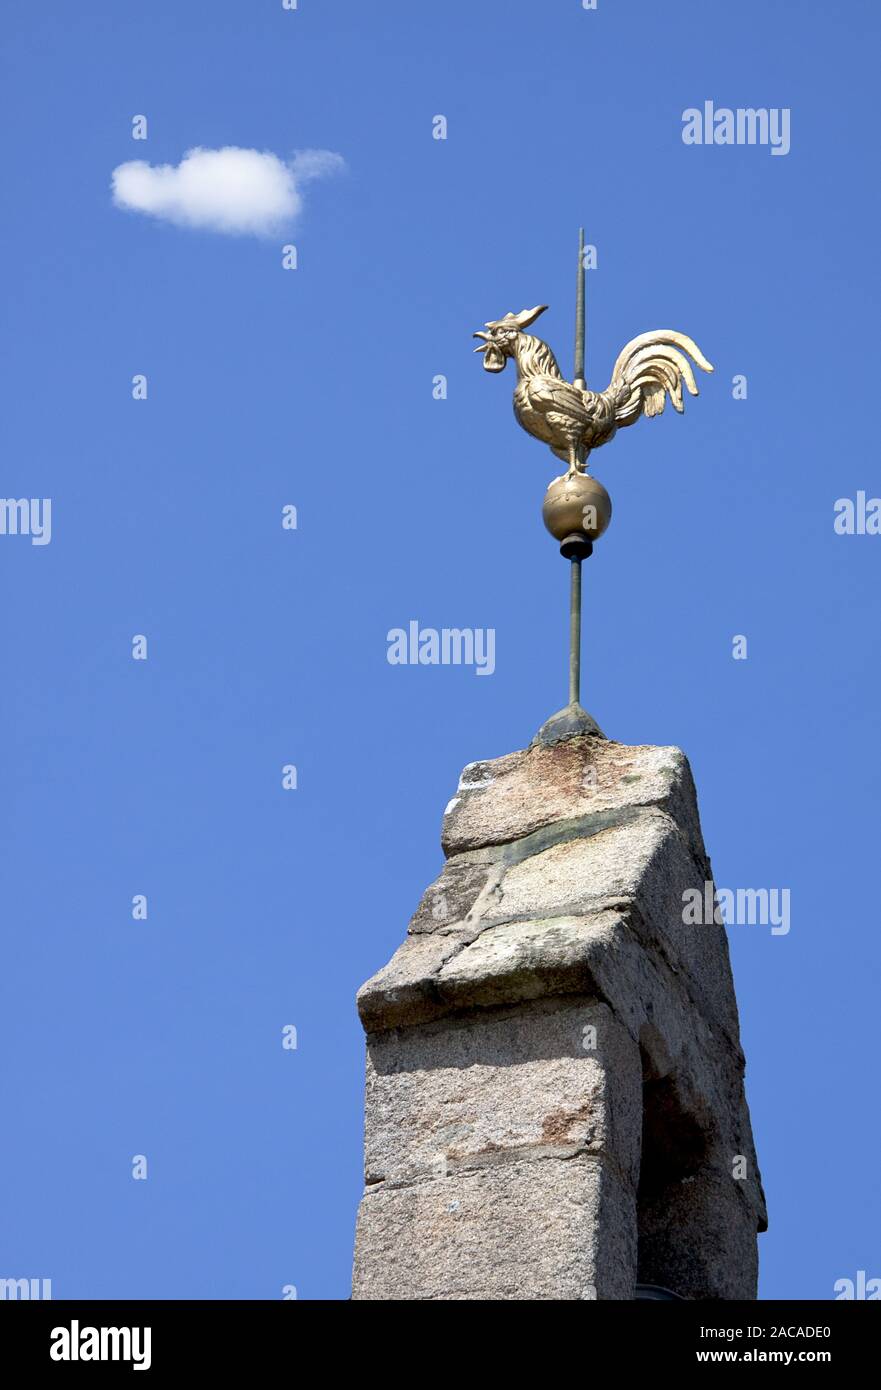 The Gallic Rooster Stock Photo